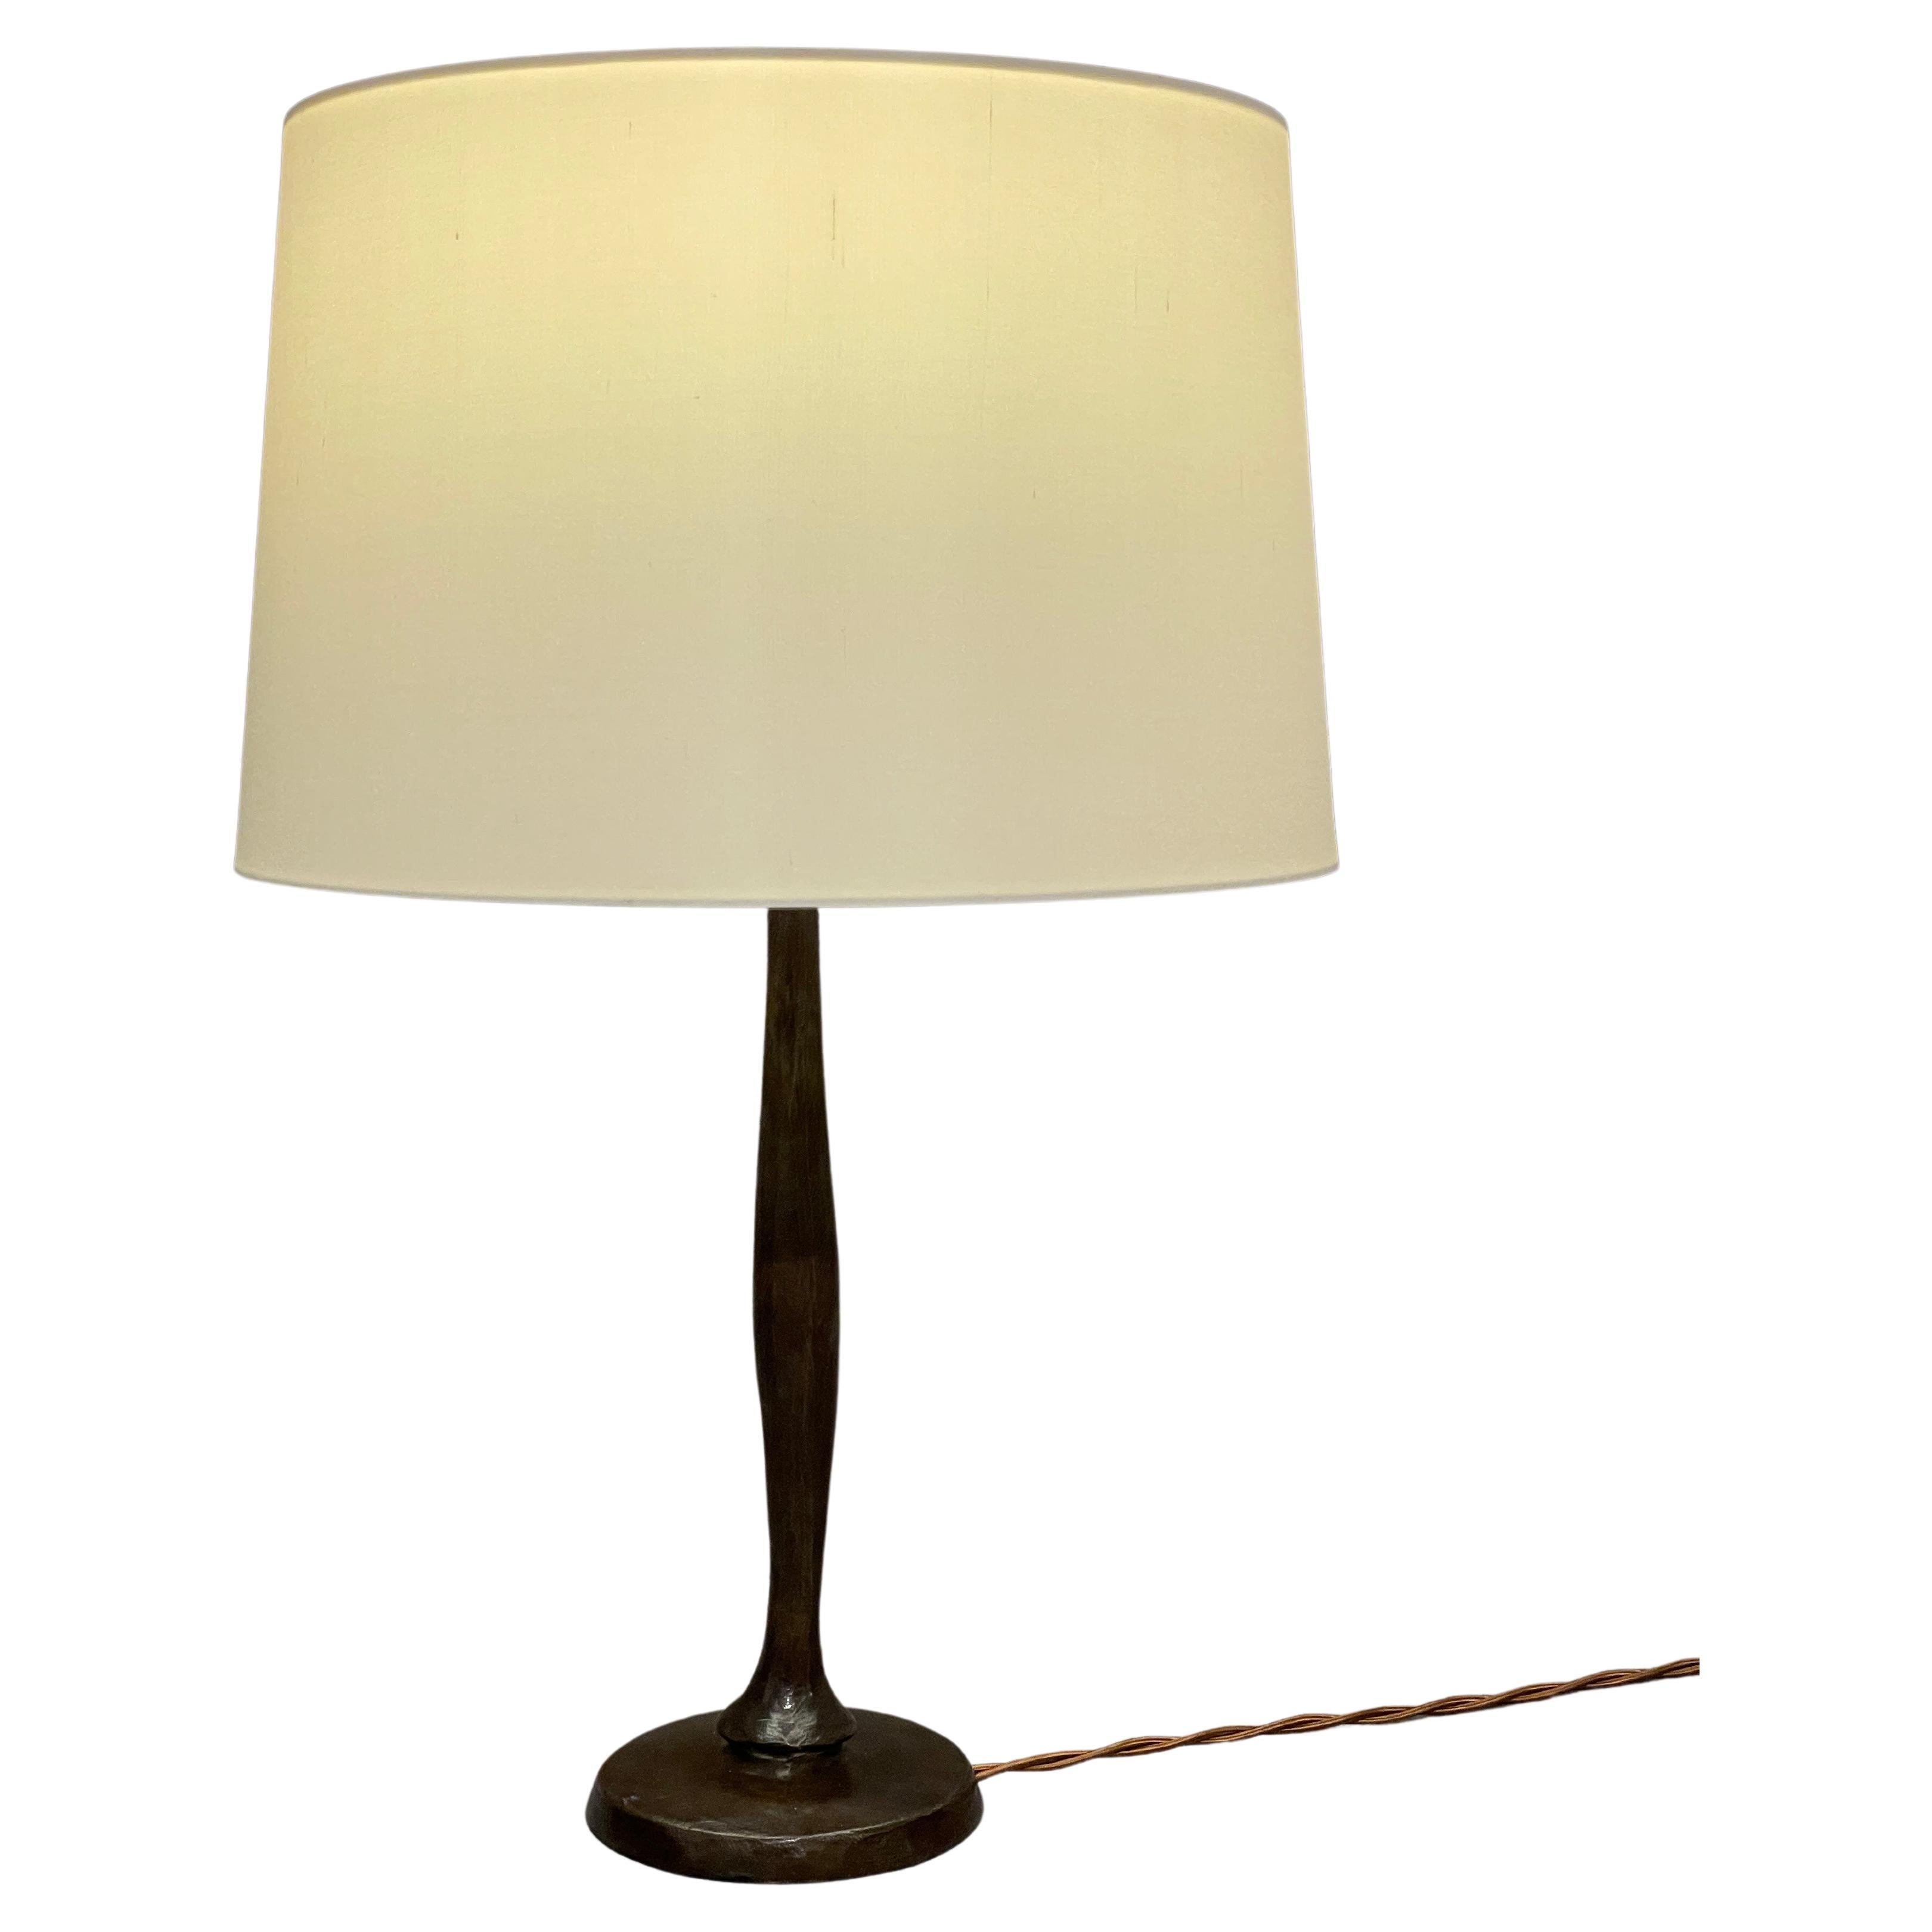 Augustin Granet Table Lamp Solid Patinated Bronze Not Giacometti But, See Video For Sale